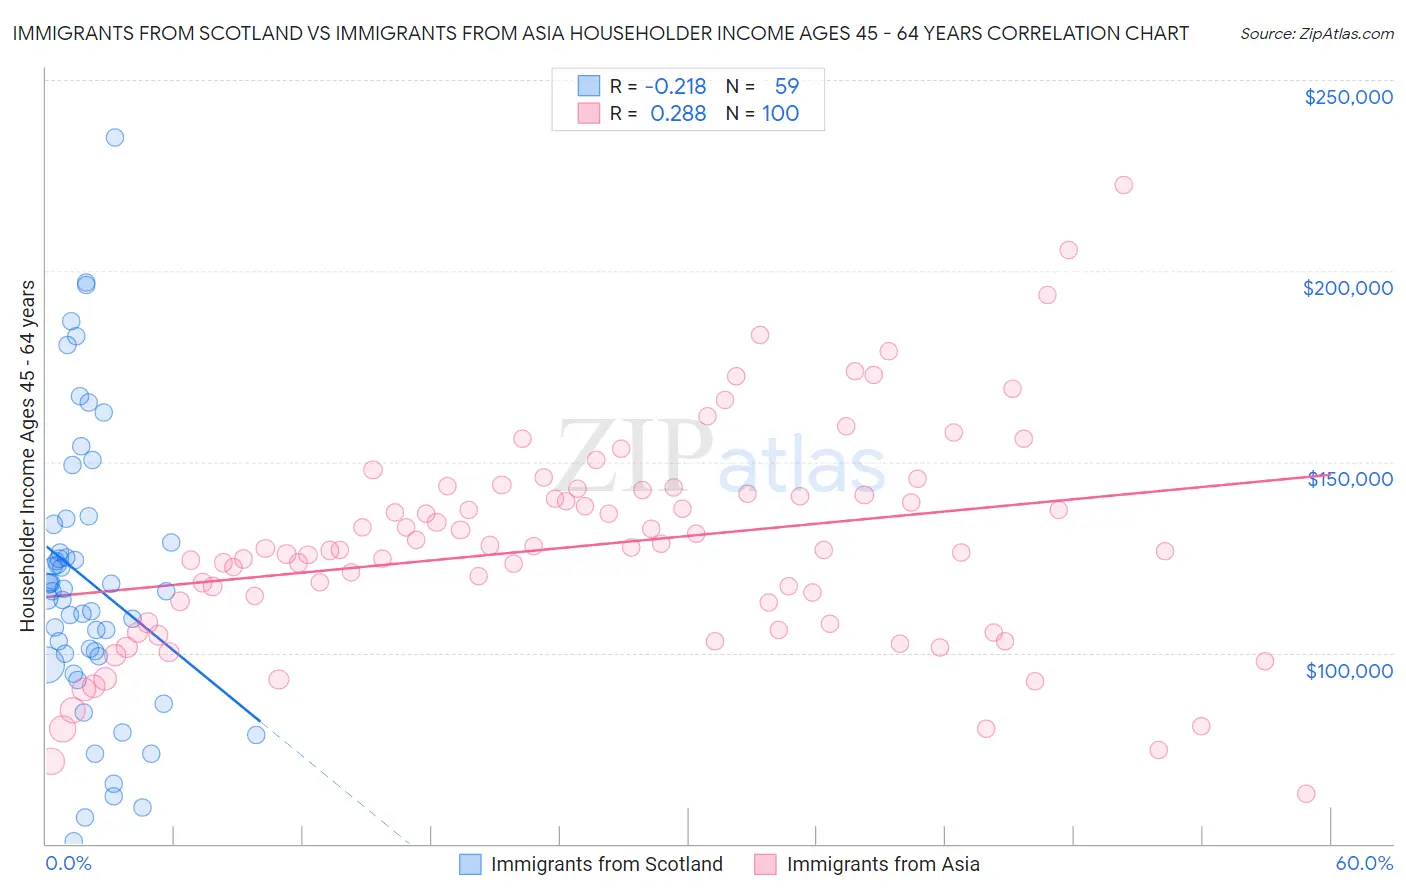 Immigrants from Scotland vs Immigrants from Asia Householder Income Ages 45 - 64 years